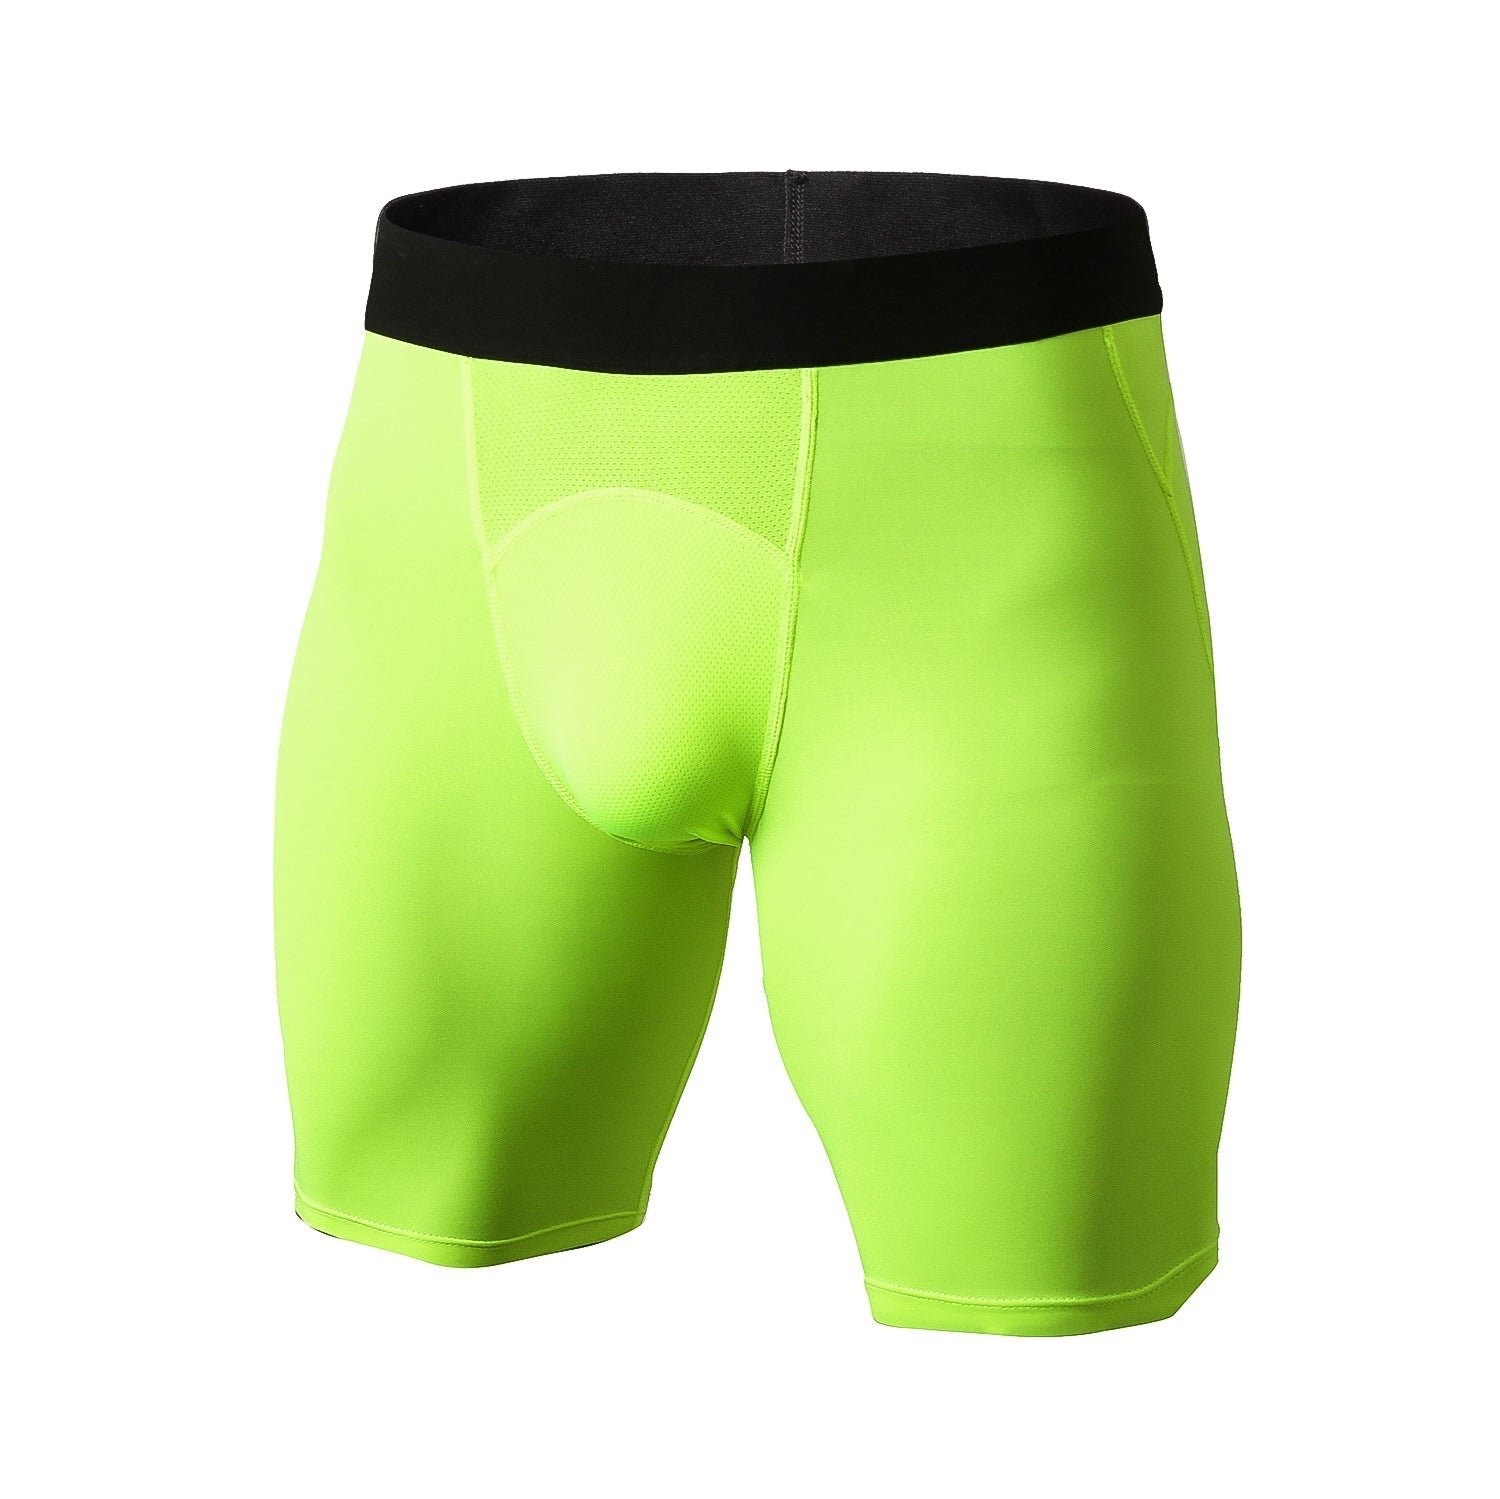 Mens Compression Shorts Quick Dry Breathable Running Tights Fitness Underpants LANBAOSI